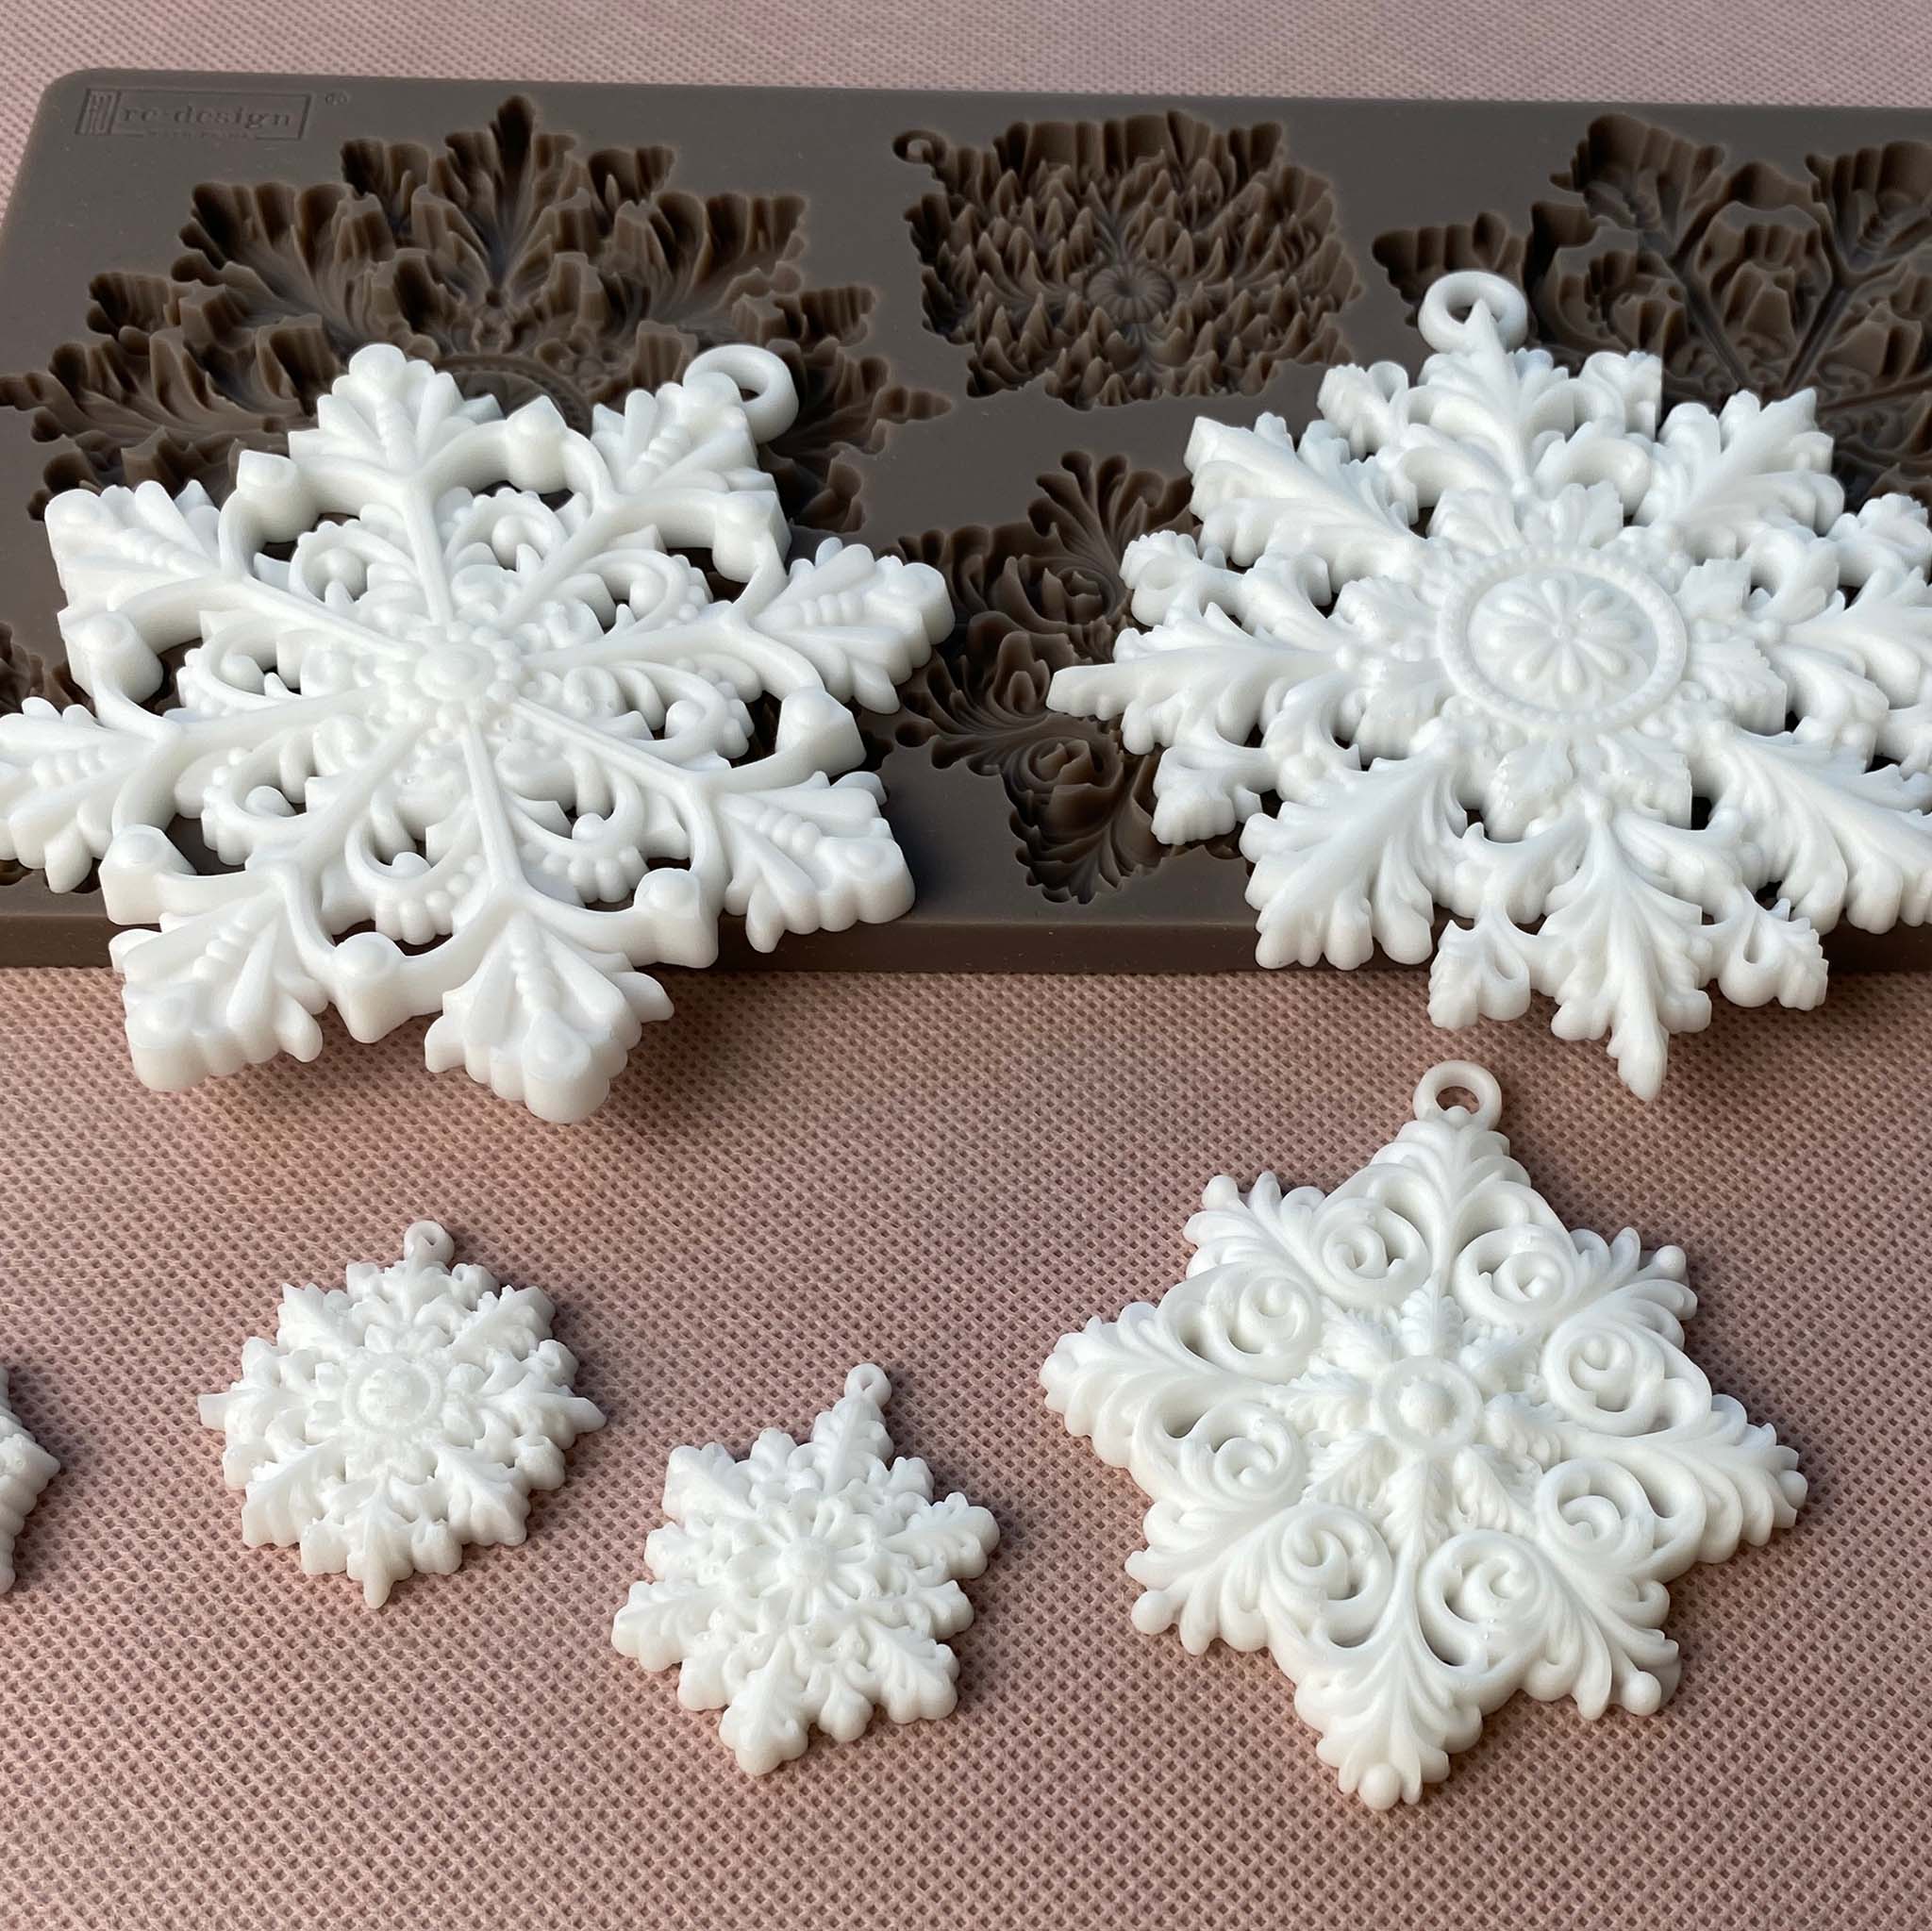 White resin castings of ReDesign with Prima's Frost Spark are set on top and under their brown silicone mould.